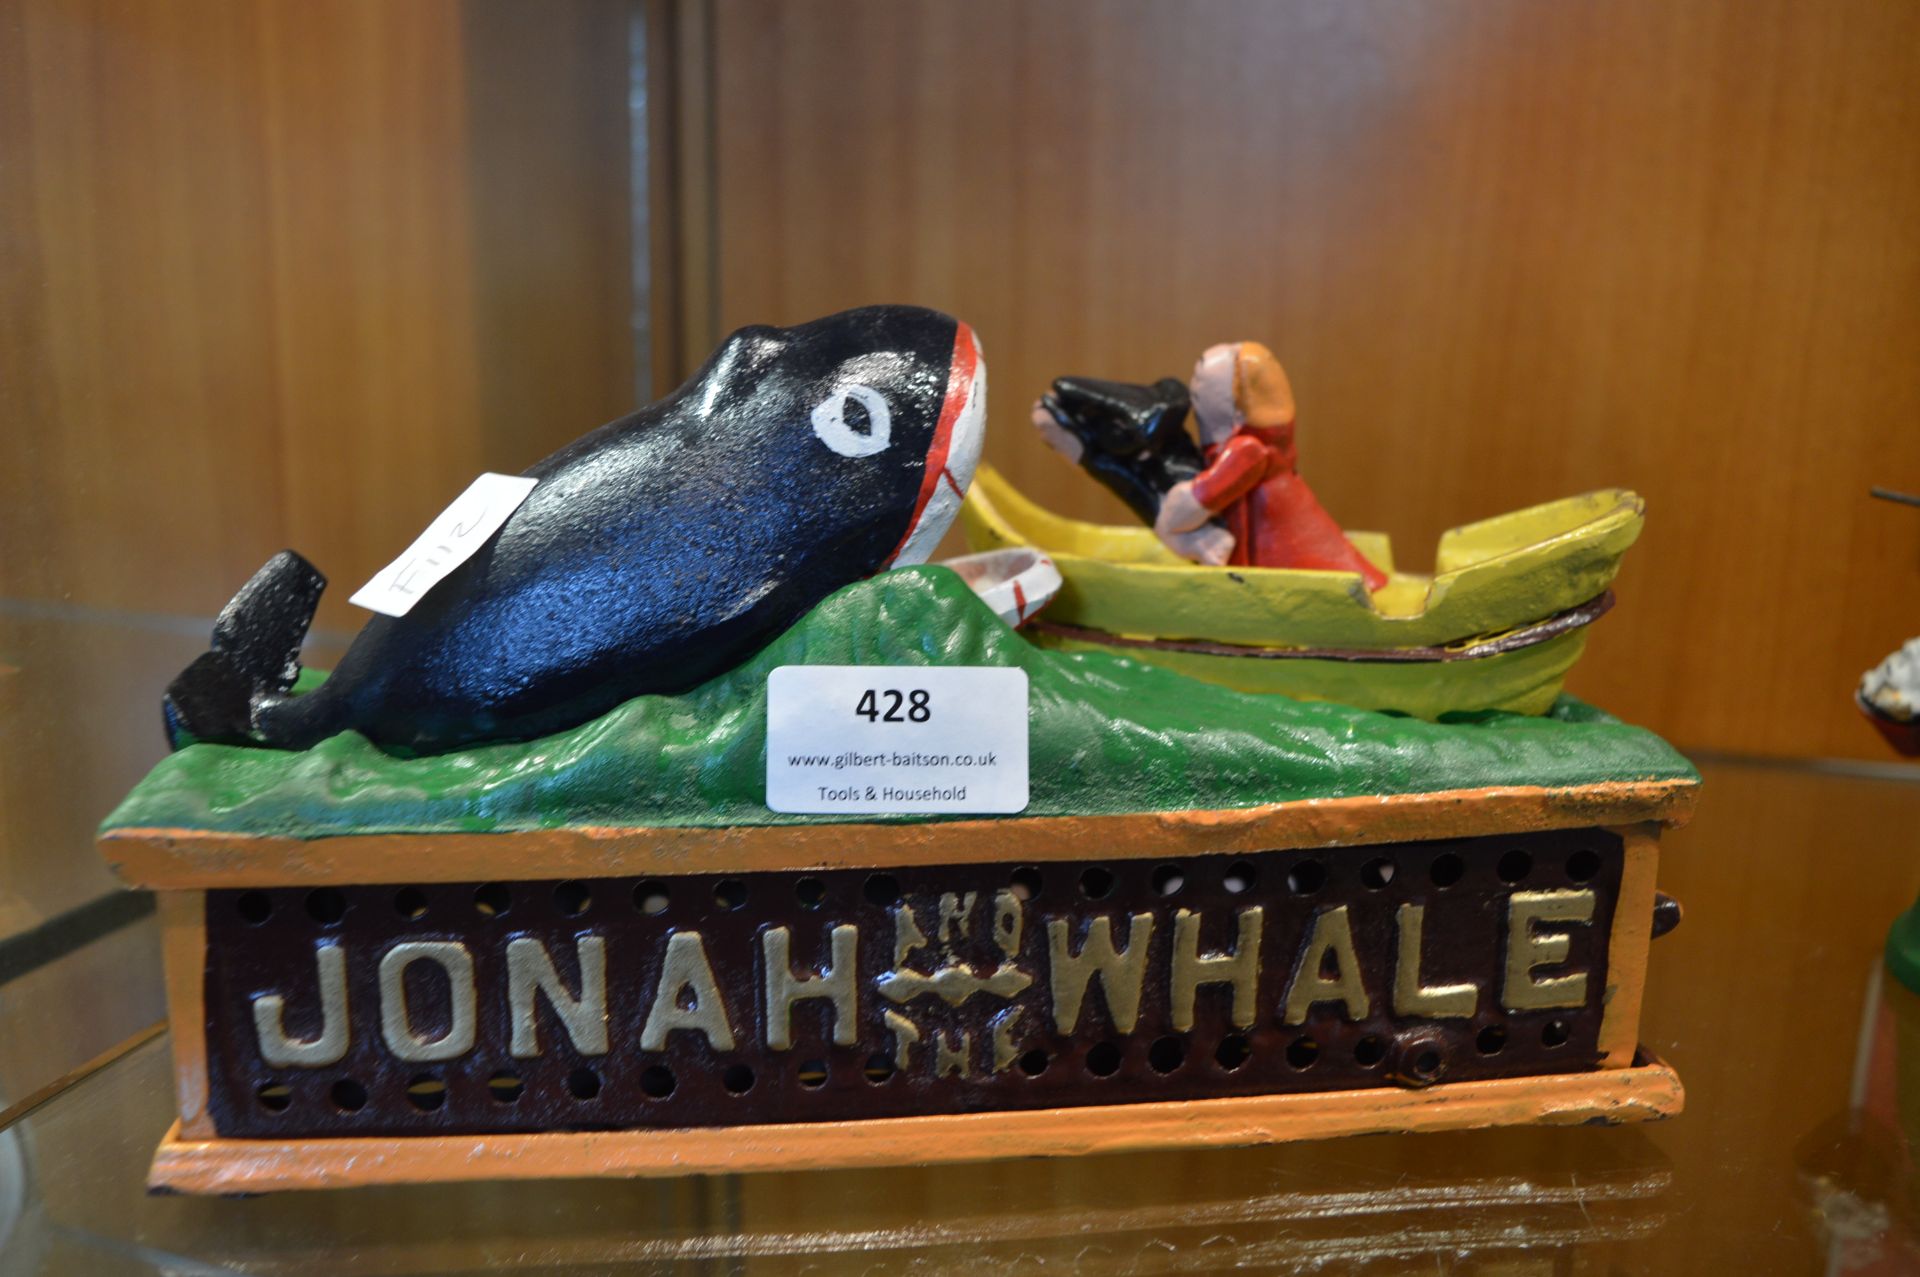 Cast Iron Box - Johnna and the Whale